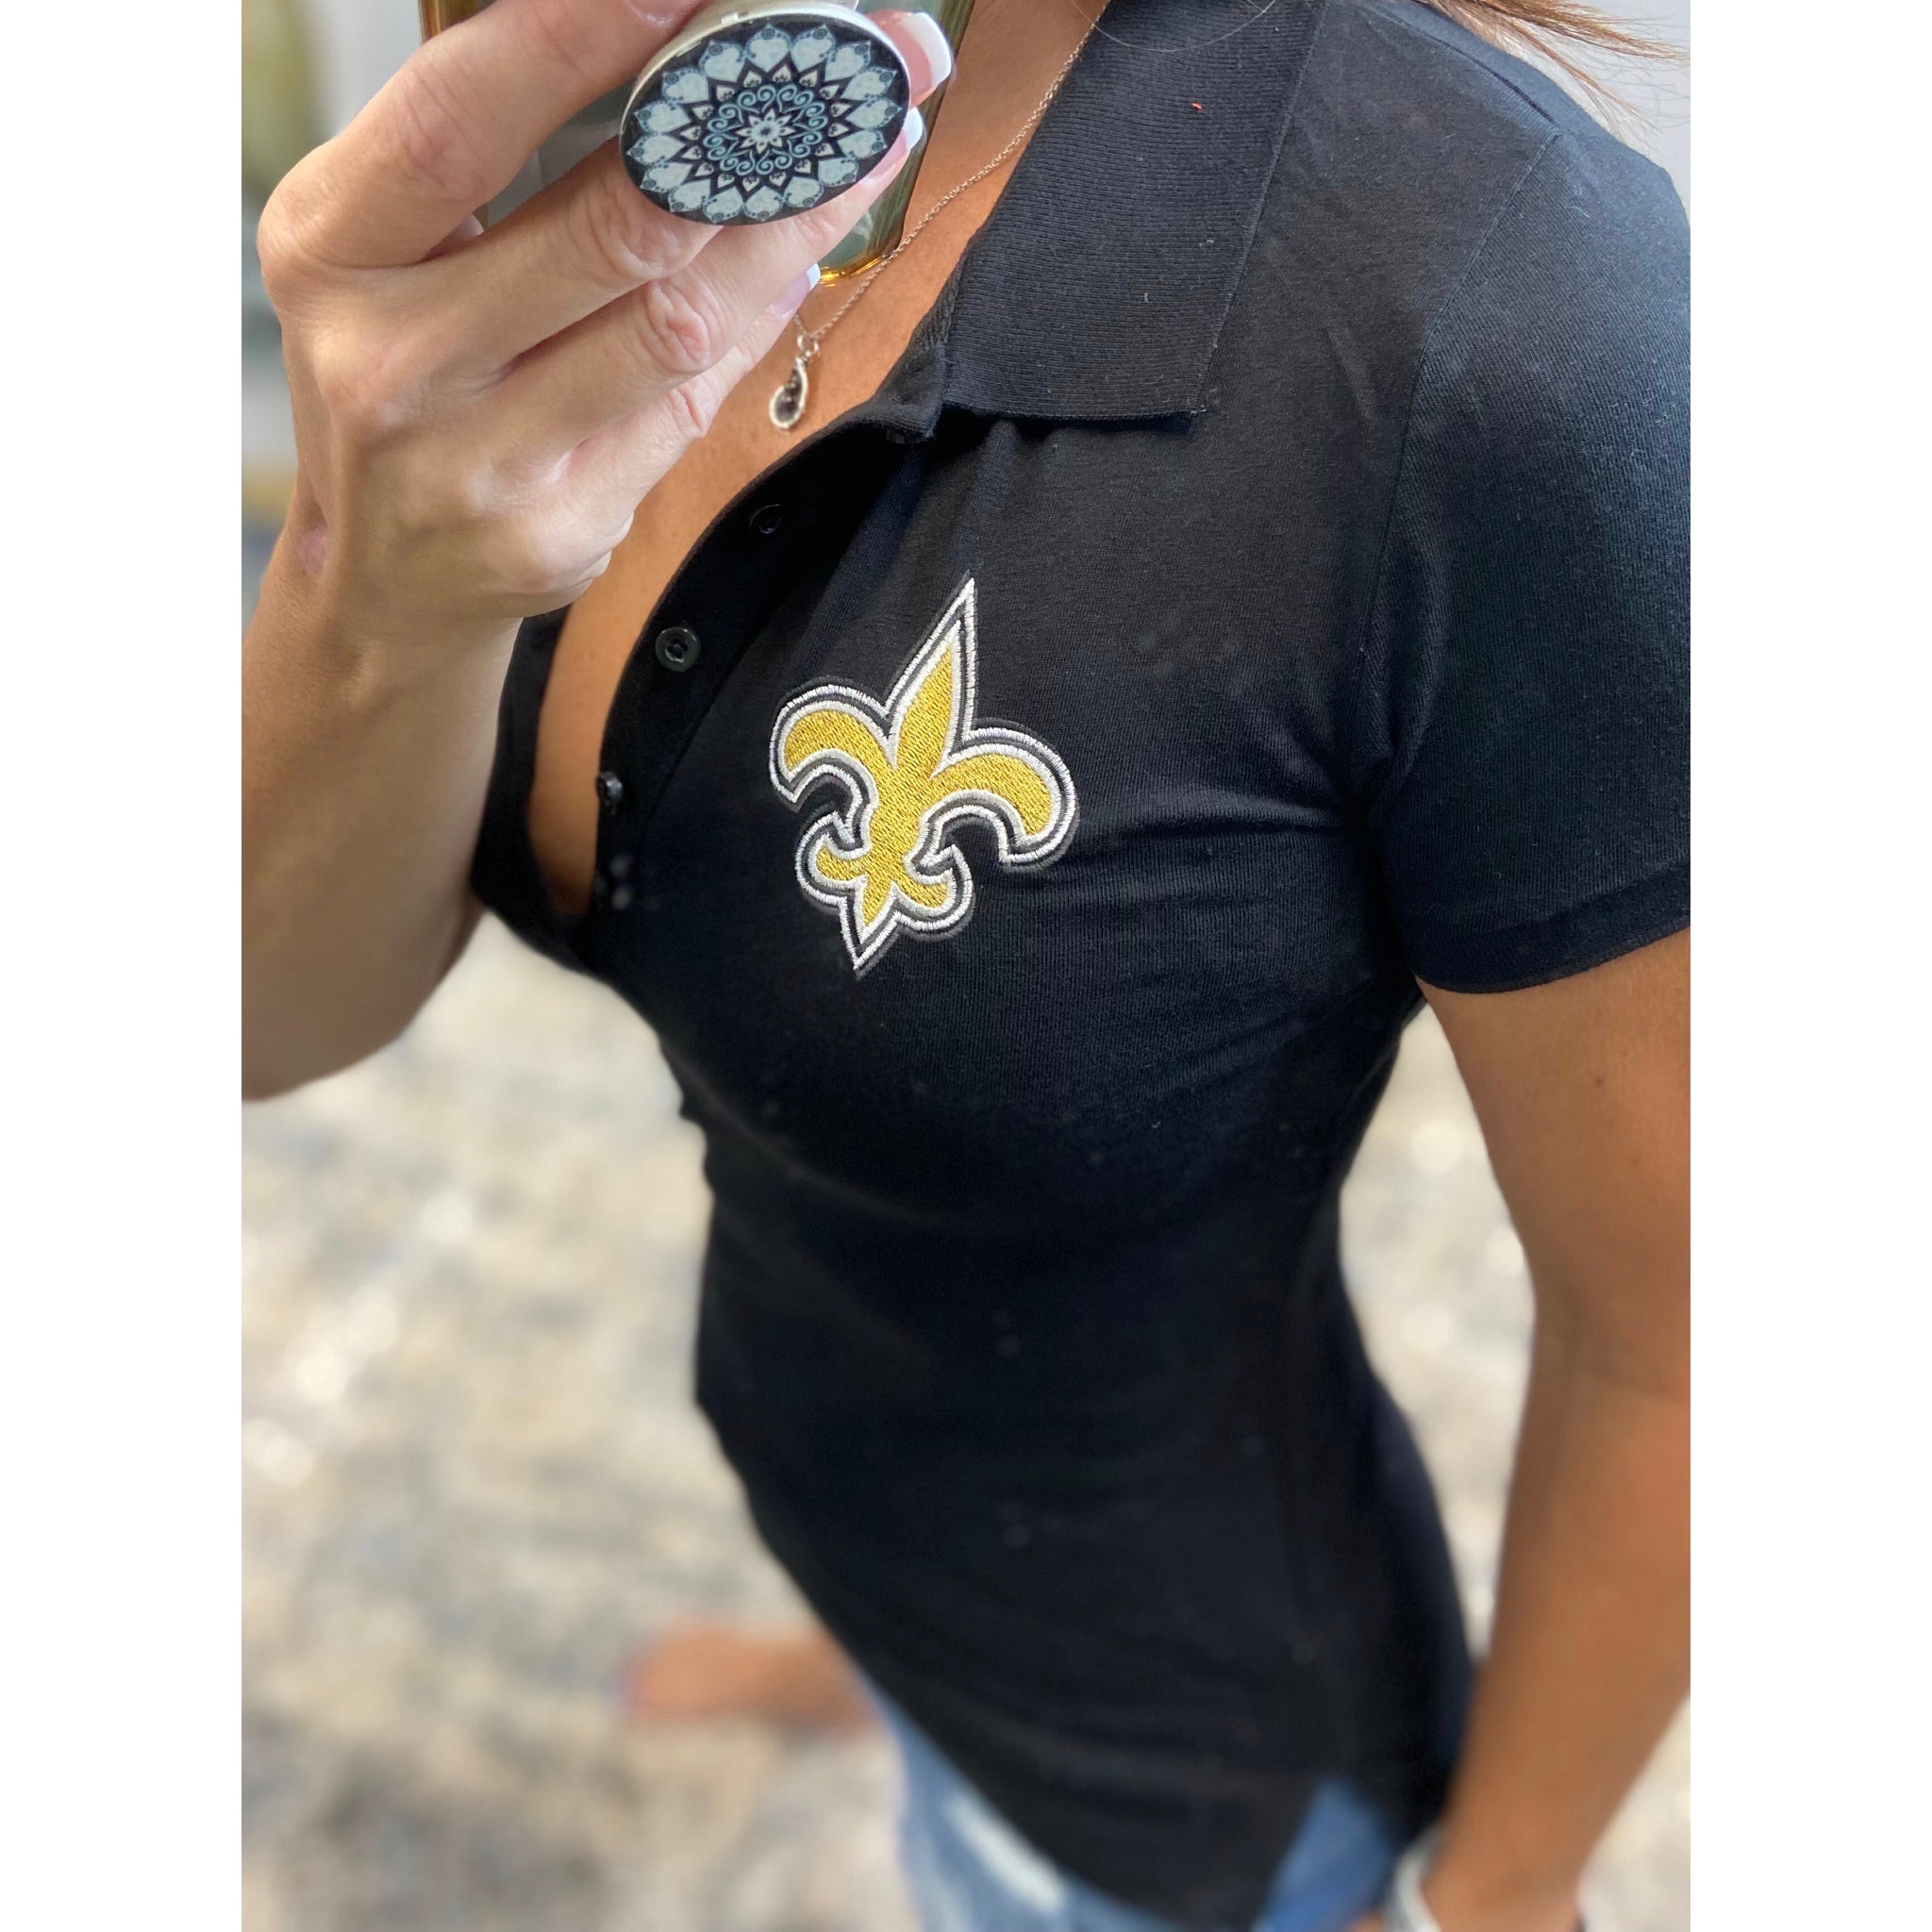 New Orleans Saints Embroidered Fleur de Lis Basic Polo Low Cut Henley Collar Slim Fitted Stretch Top Black S/M/L